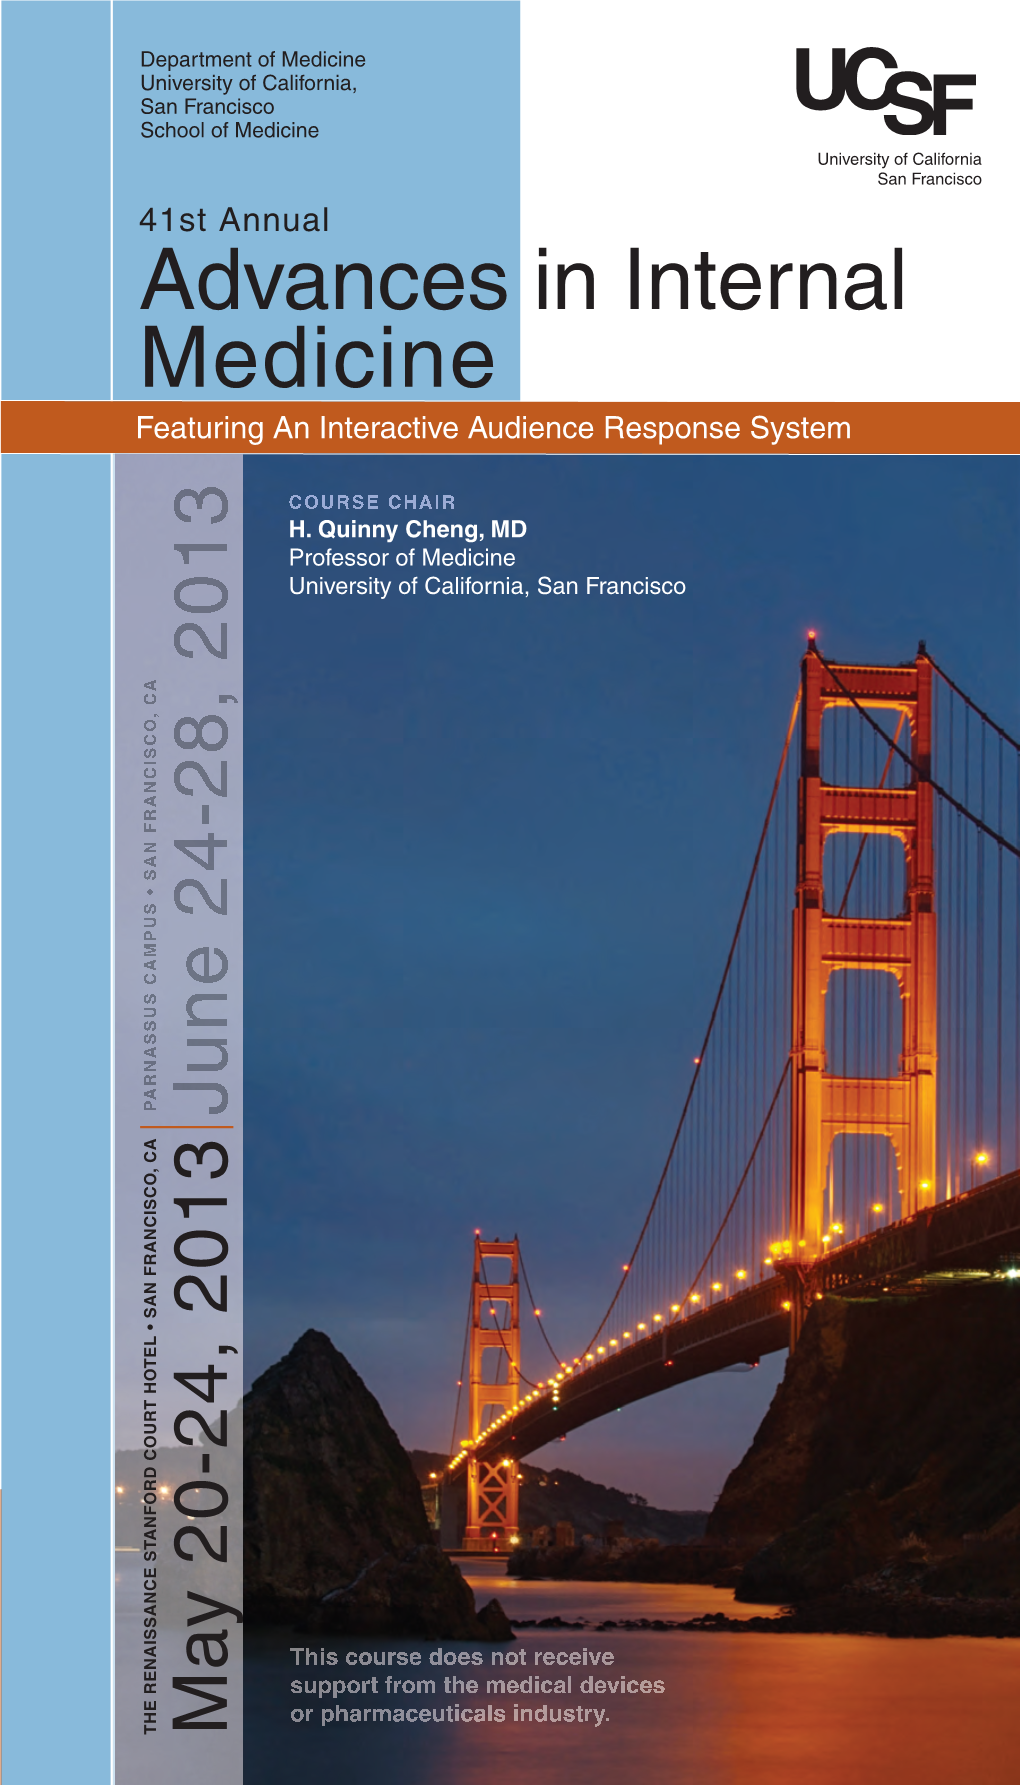 Advances in Internal Medicine Featuring an Interactive Audience Response System